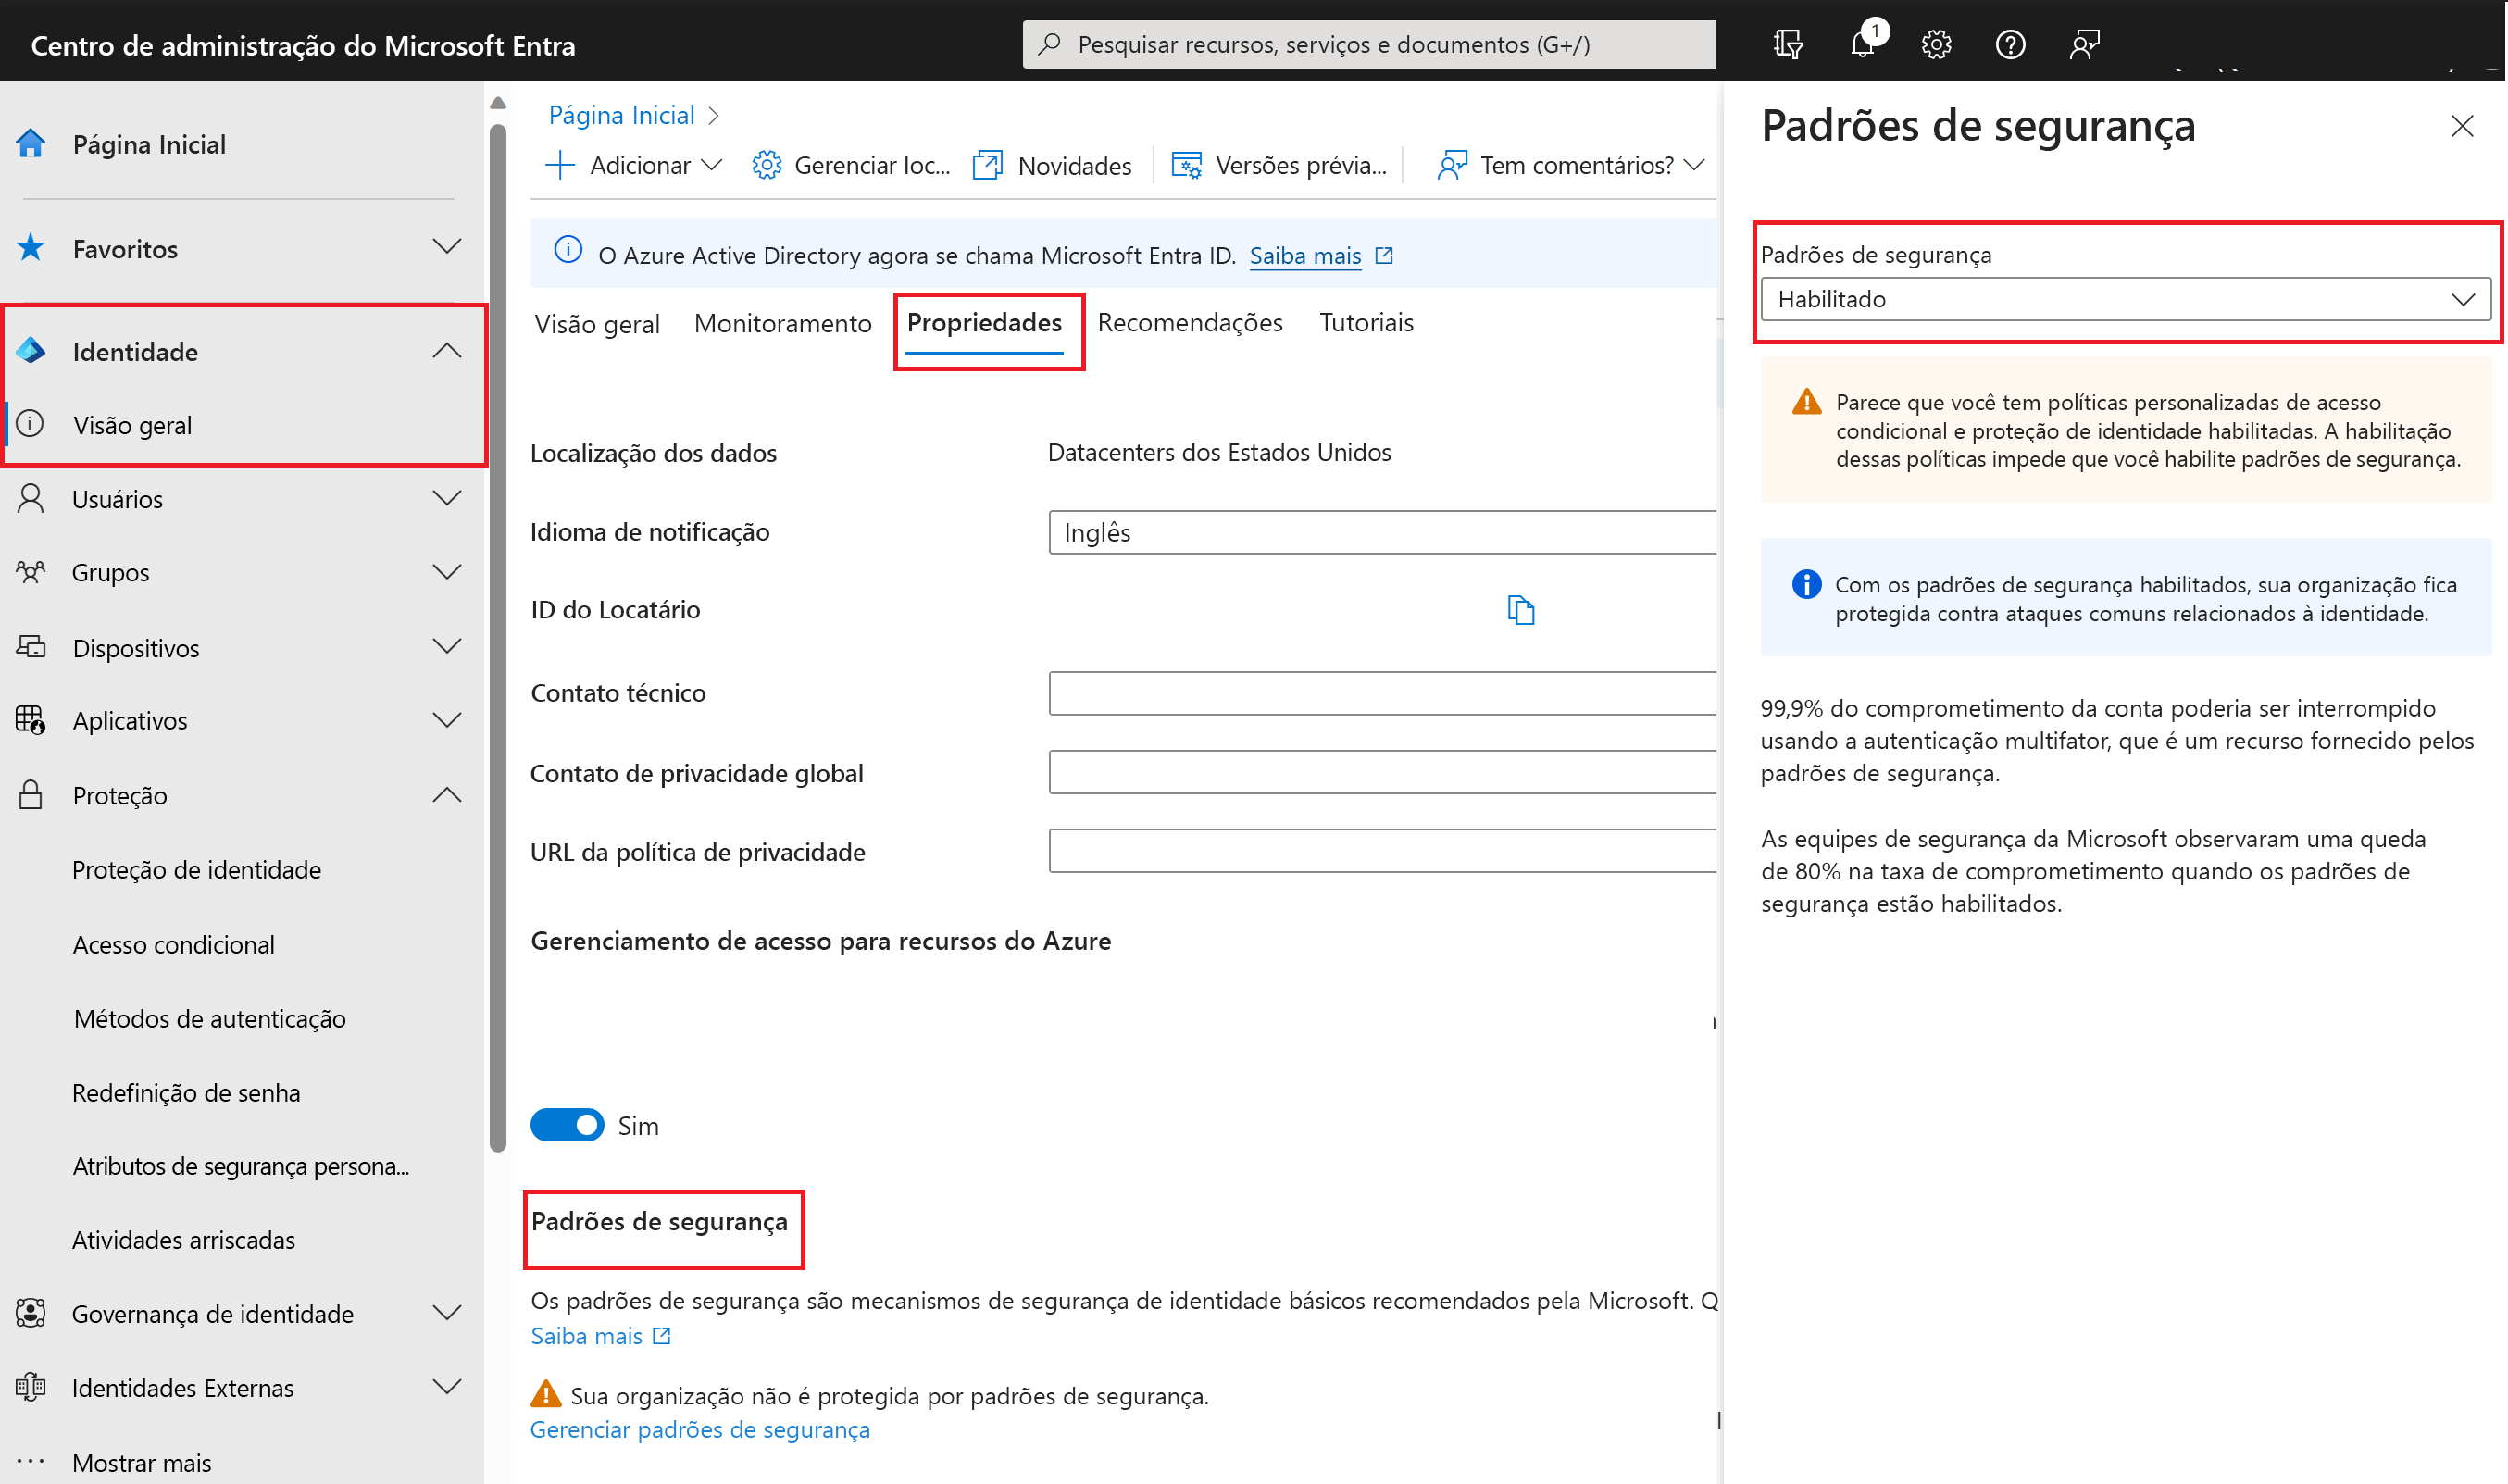 Screenshot of the Microsoft Entra admin center with the toggle to enable security defaults.